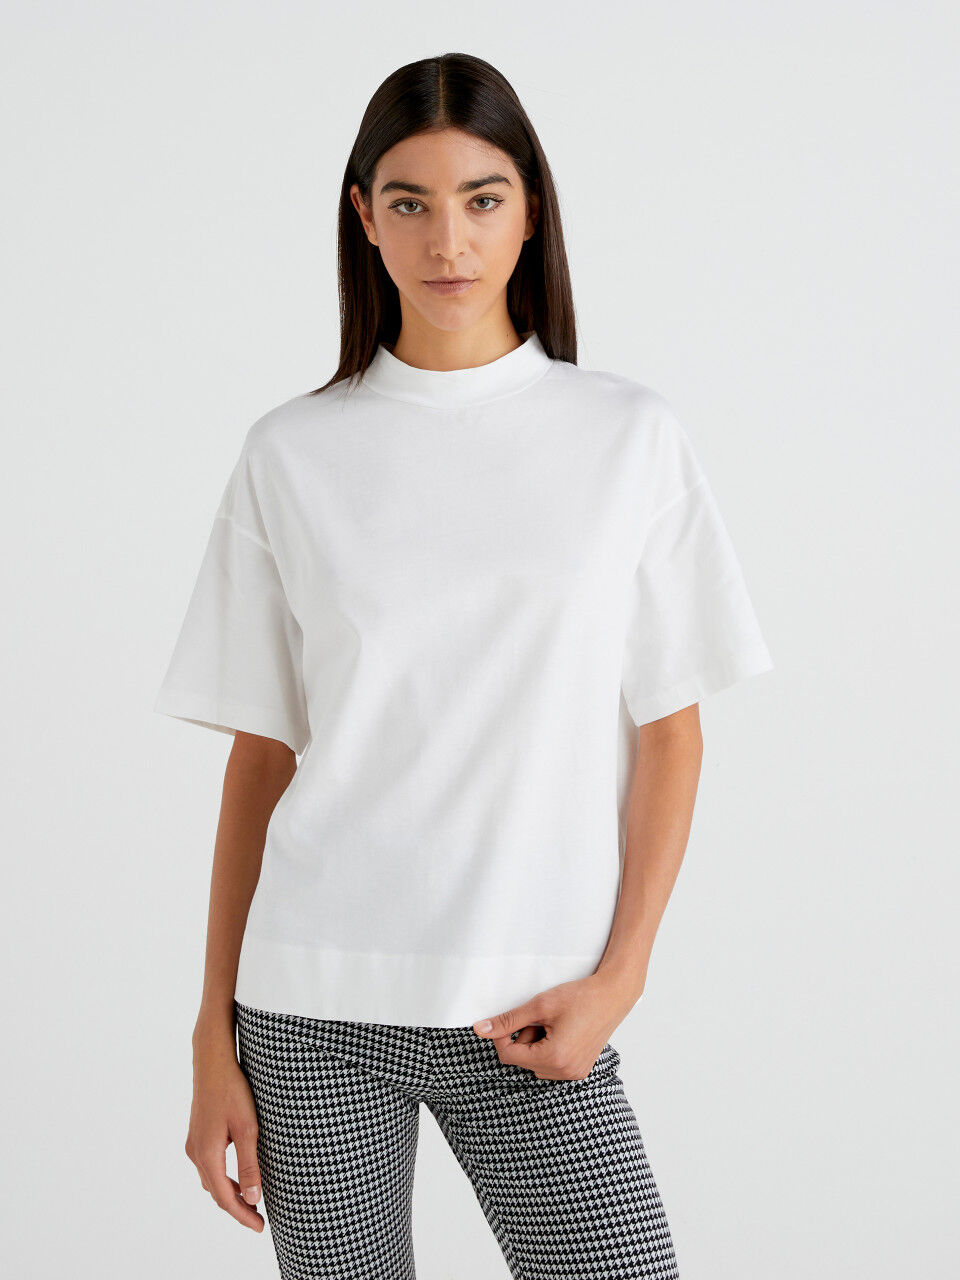 T-shirt with standing neck